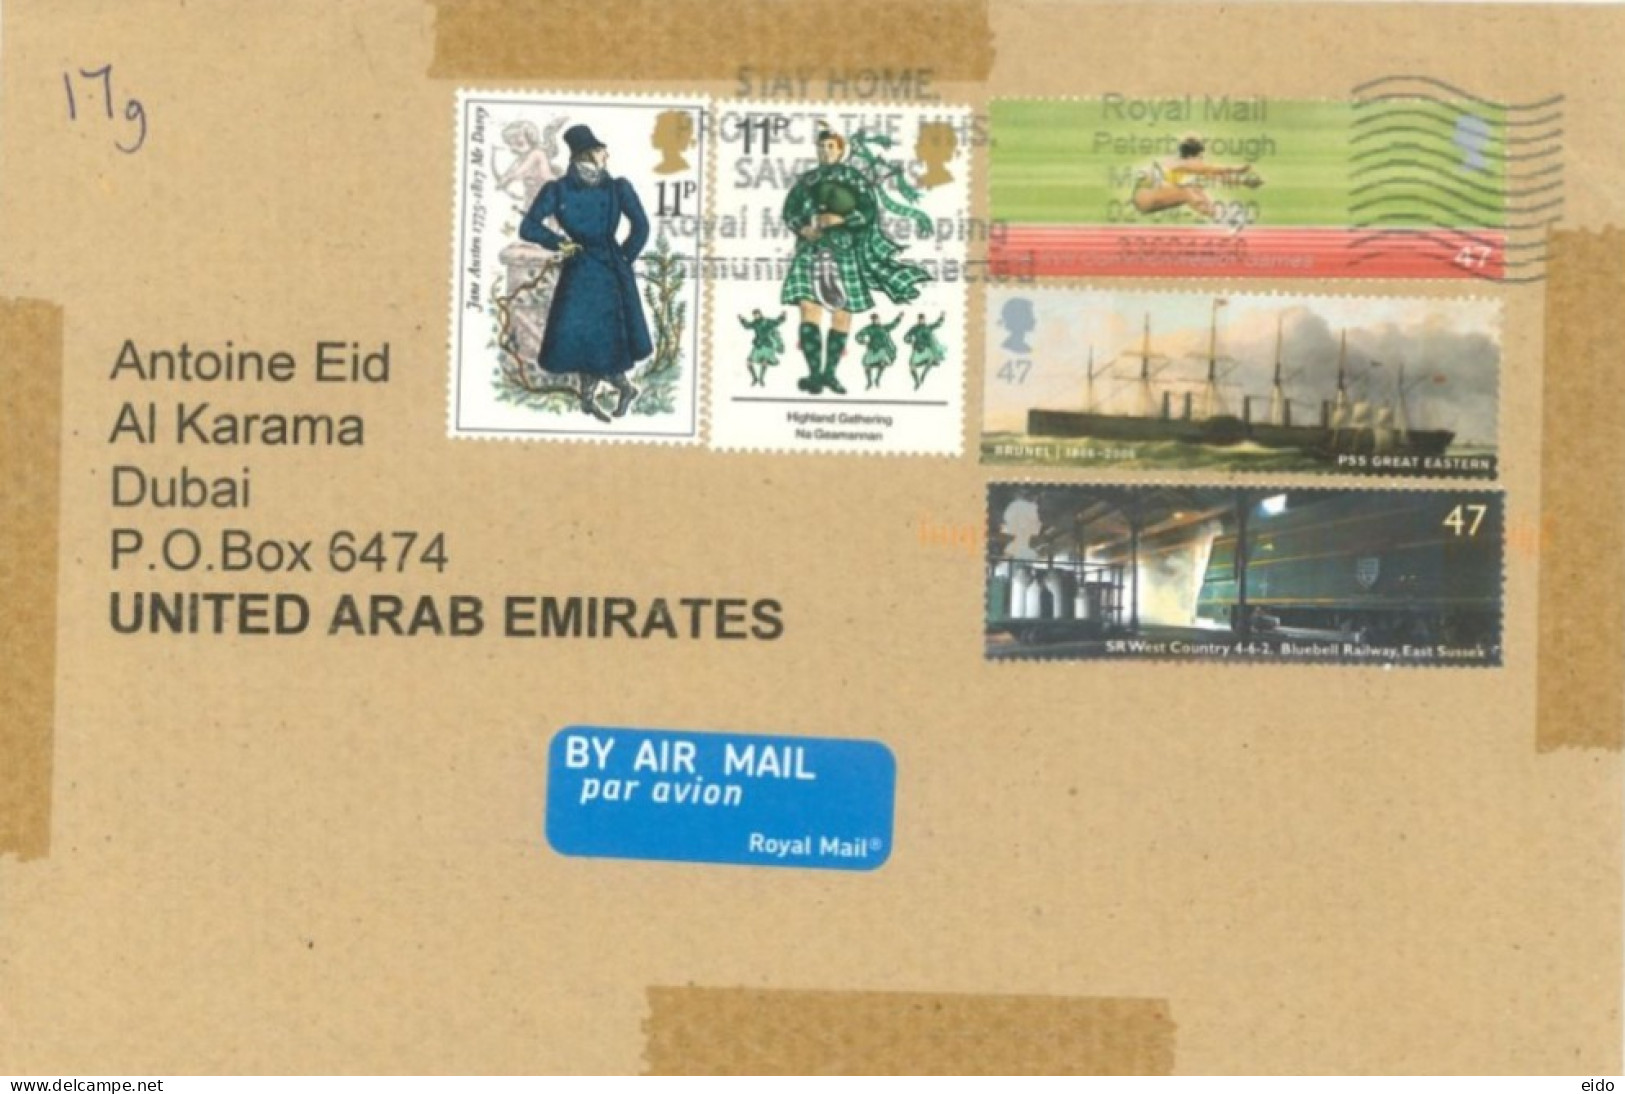 GREAT BRITIAN : 2020, STAMPS COVER TO DUBIA - Covers & Documents